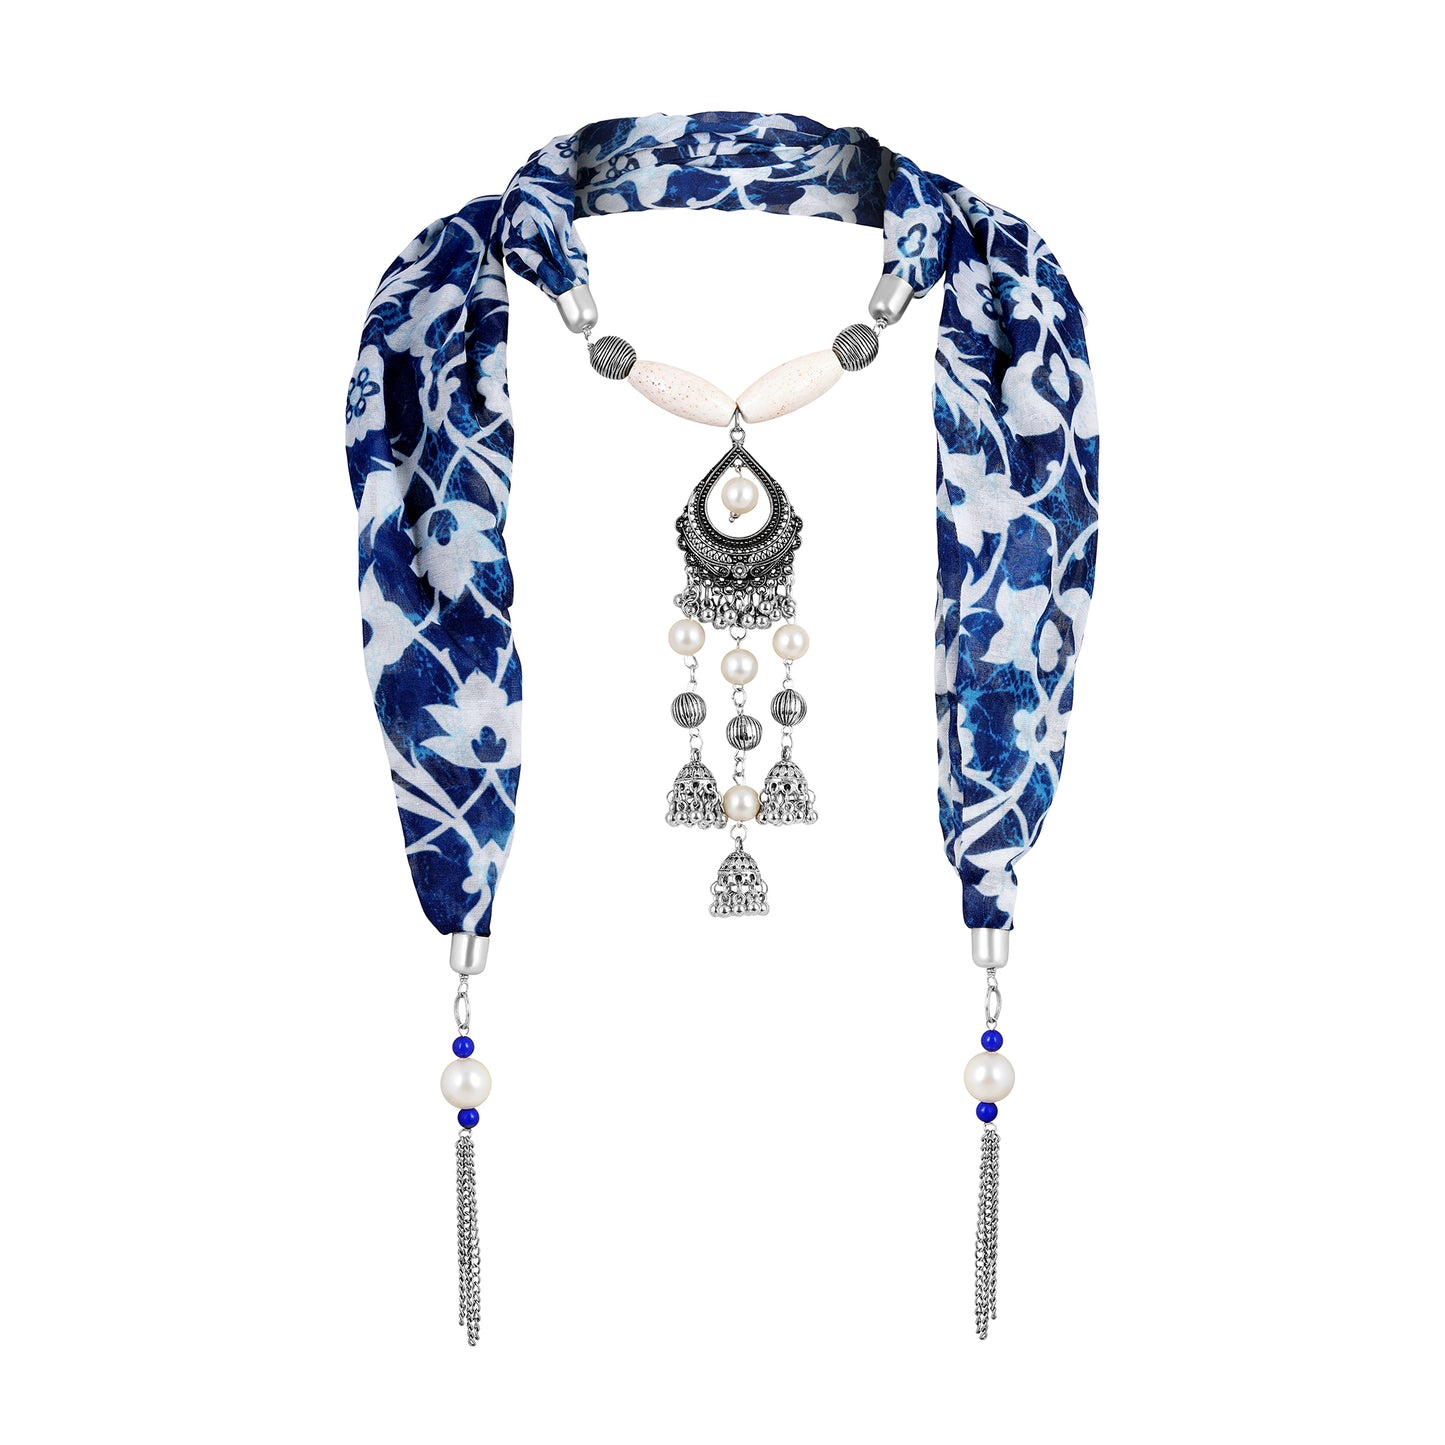 Bdiva Indigo Floral Scarf with Indian Jewelry and Motif.